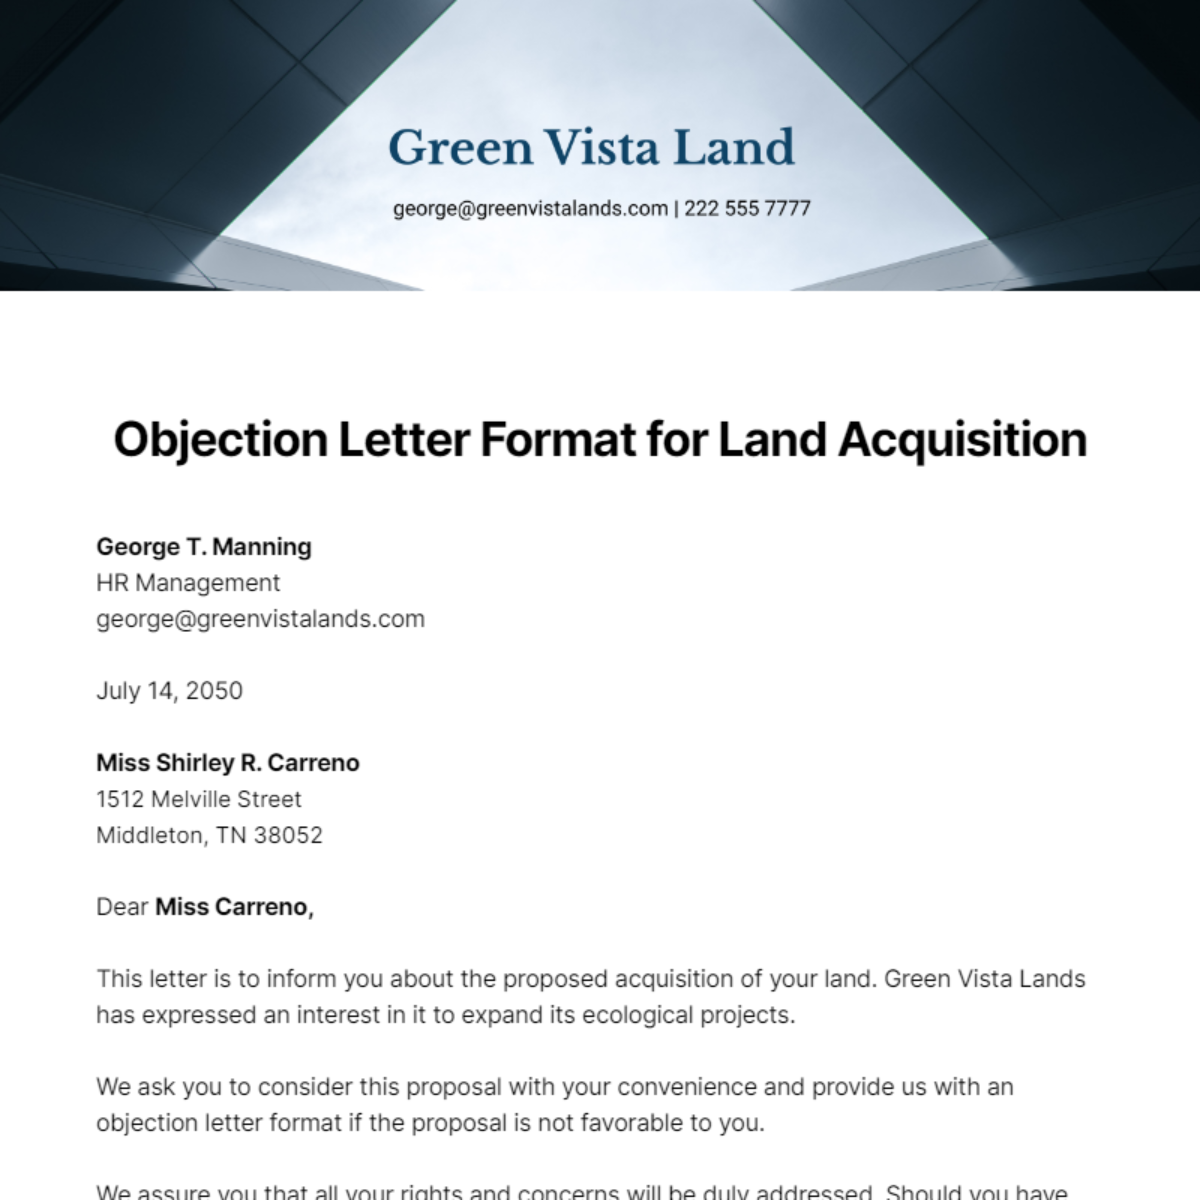 Objection Letter Format for Land Acquisition Template